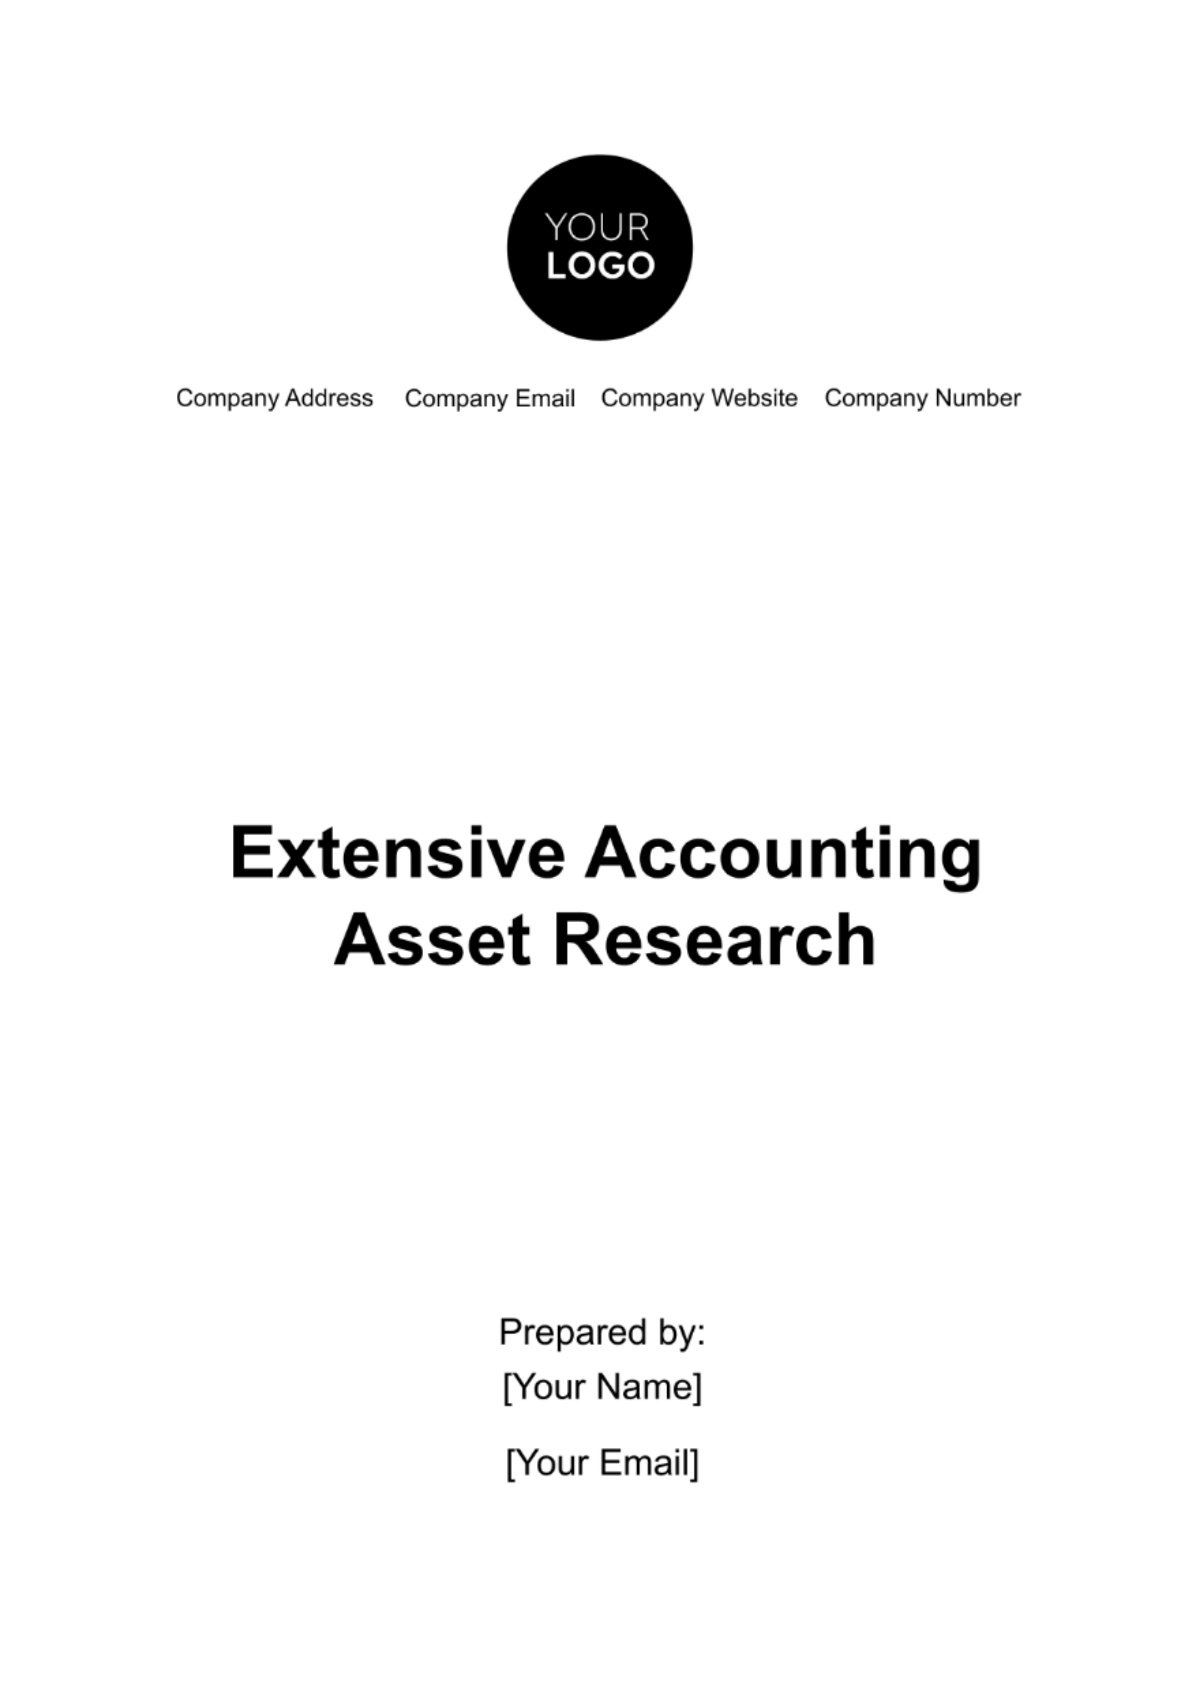 Extensive Accounting Asset Research Template